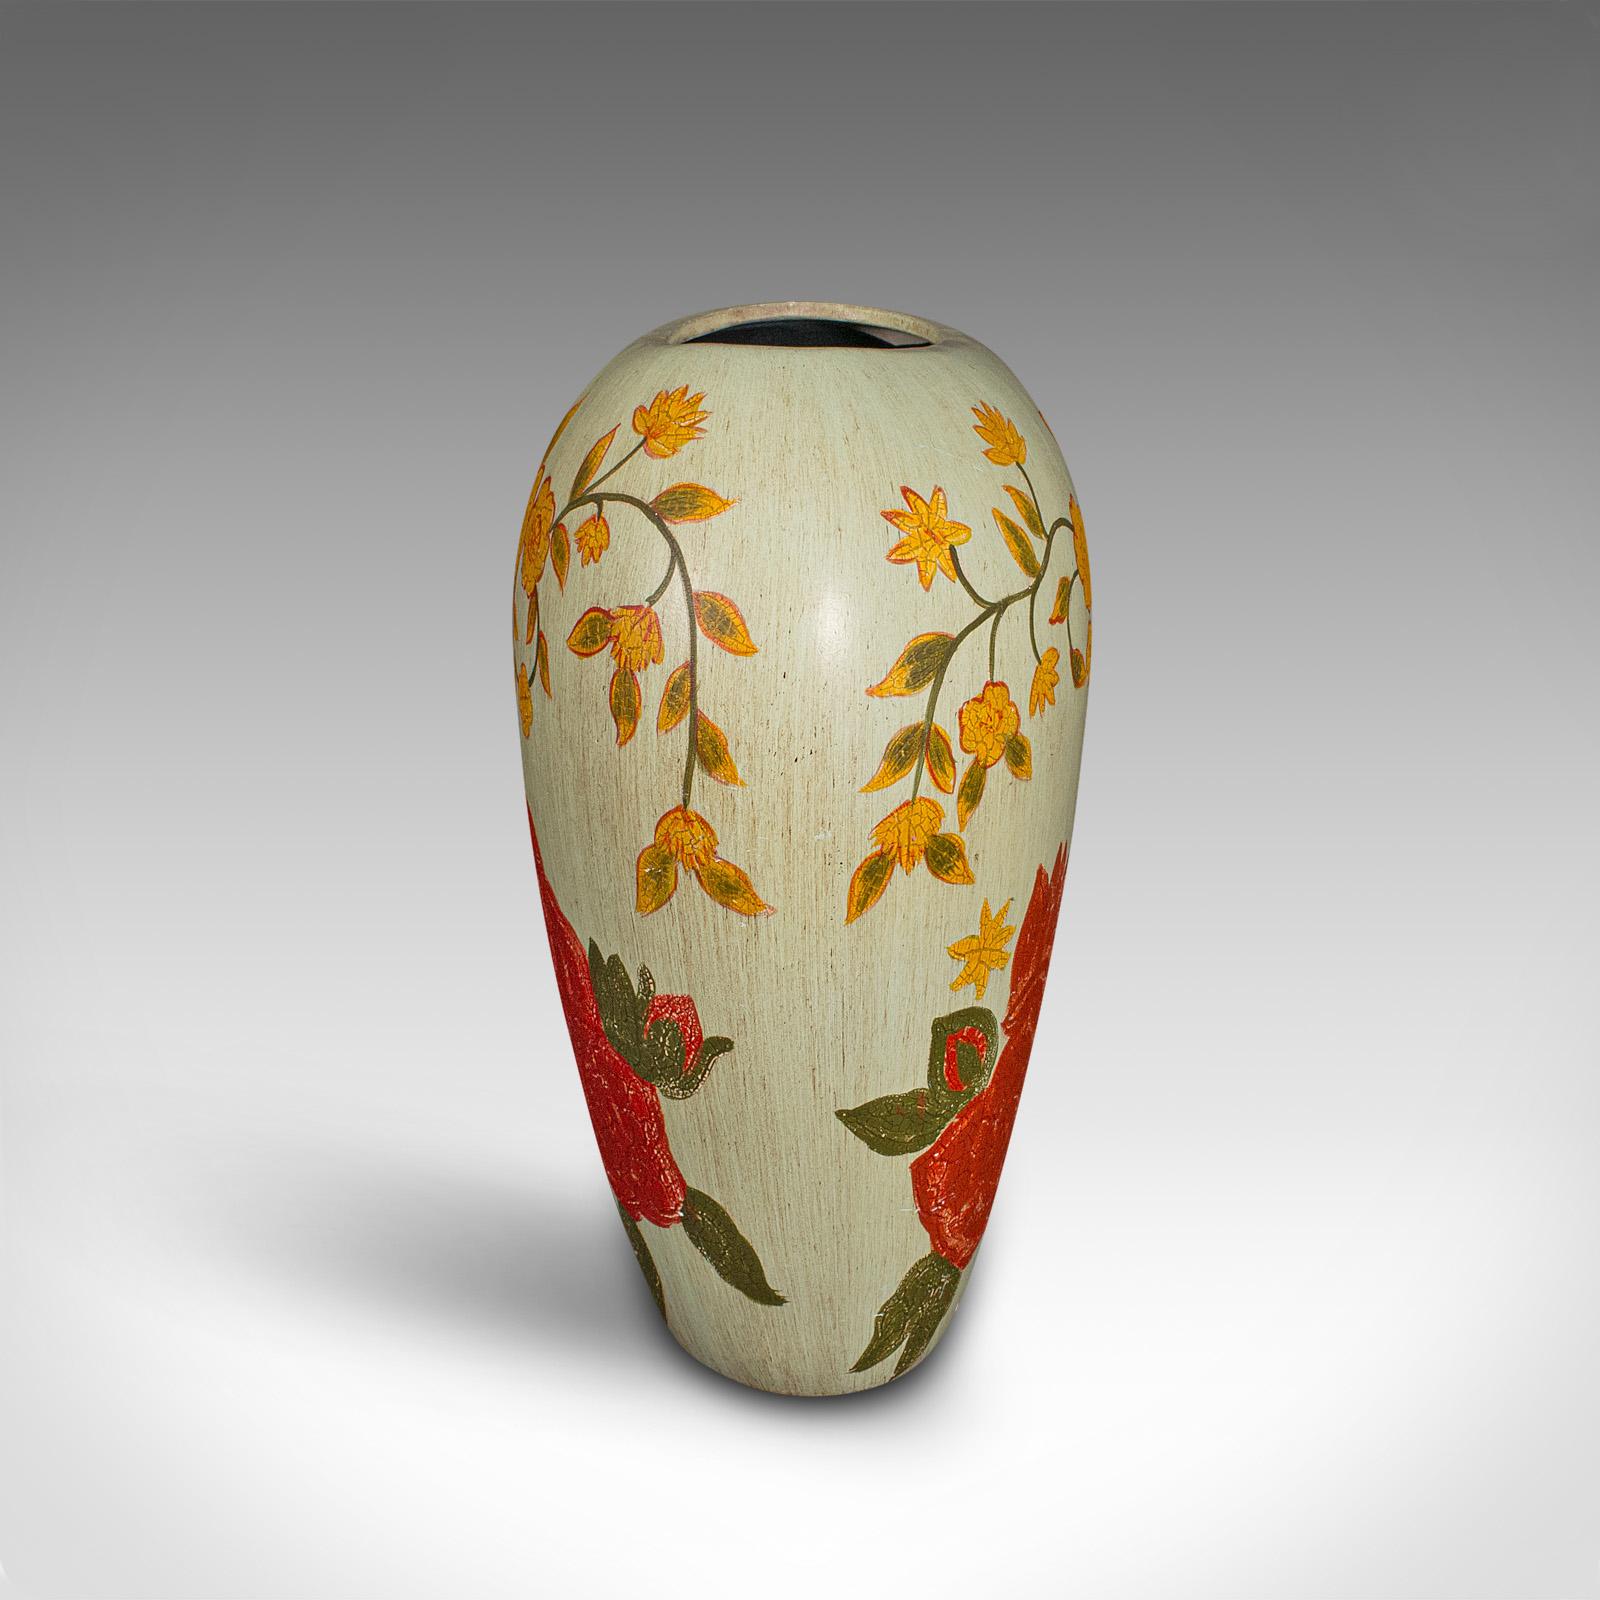 Vintage Oval Flower Vase, Spanish, Hand Painted, Ceramic, Planter, Mid Century In Good Condition For Sale In Hele, Devon, GB